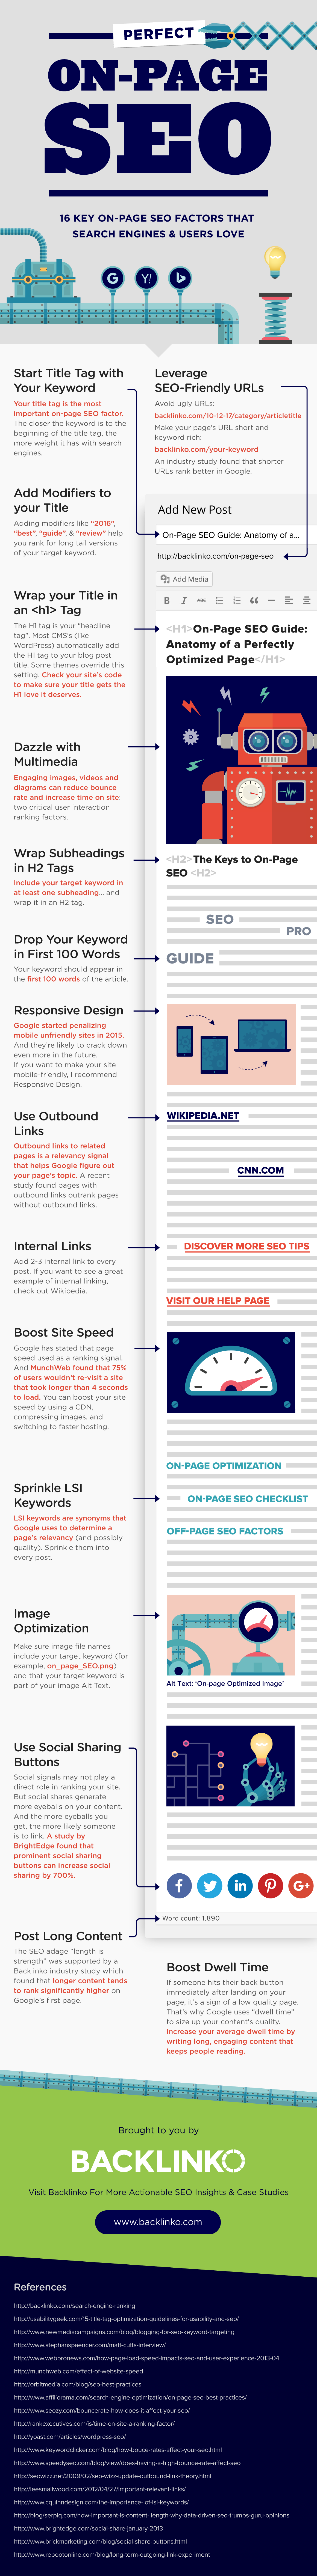 on_page_seo_infographic_v3-1-2